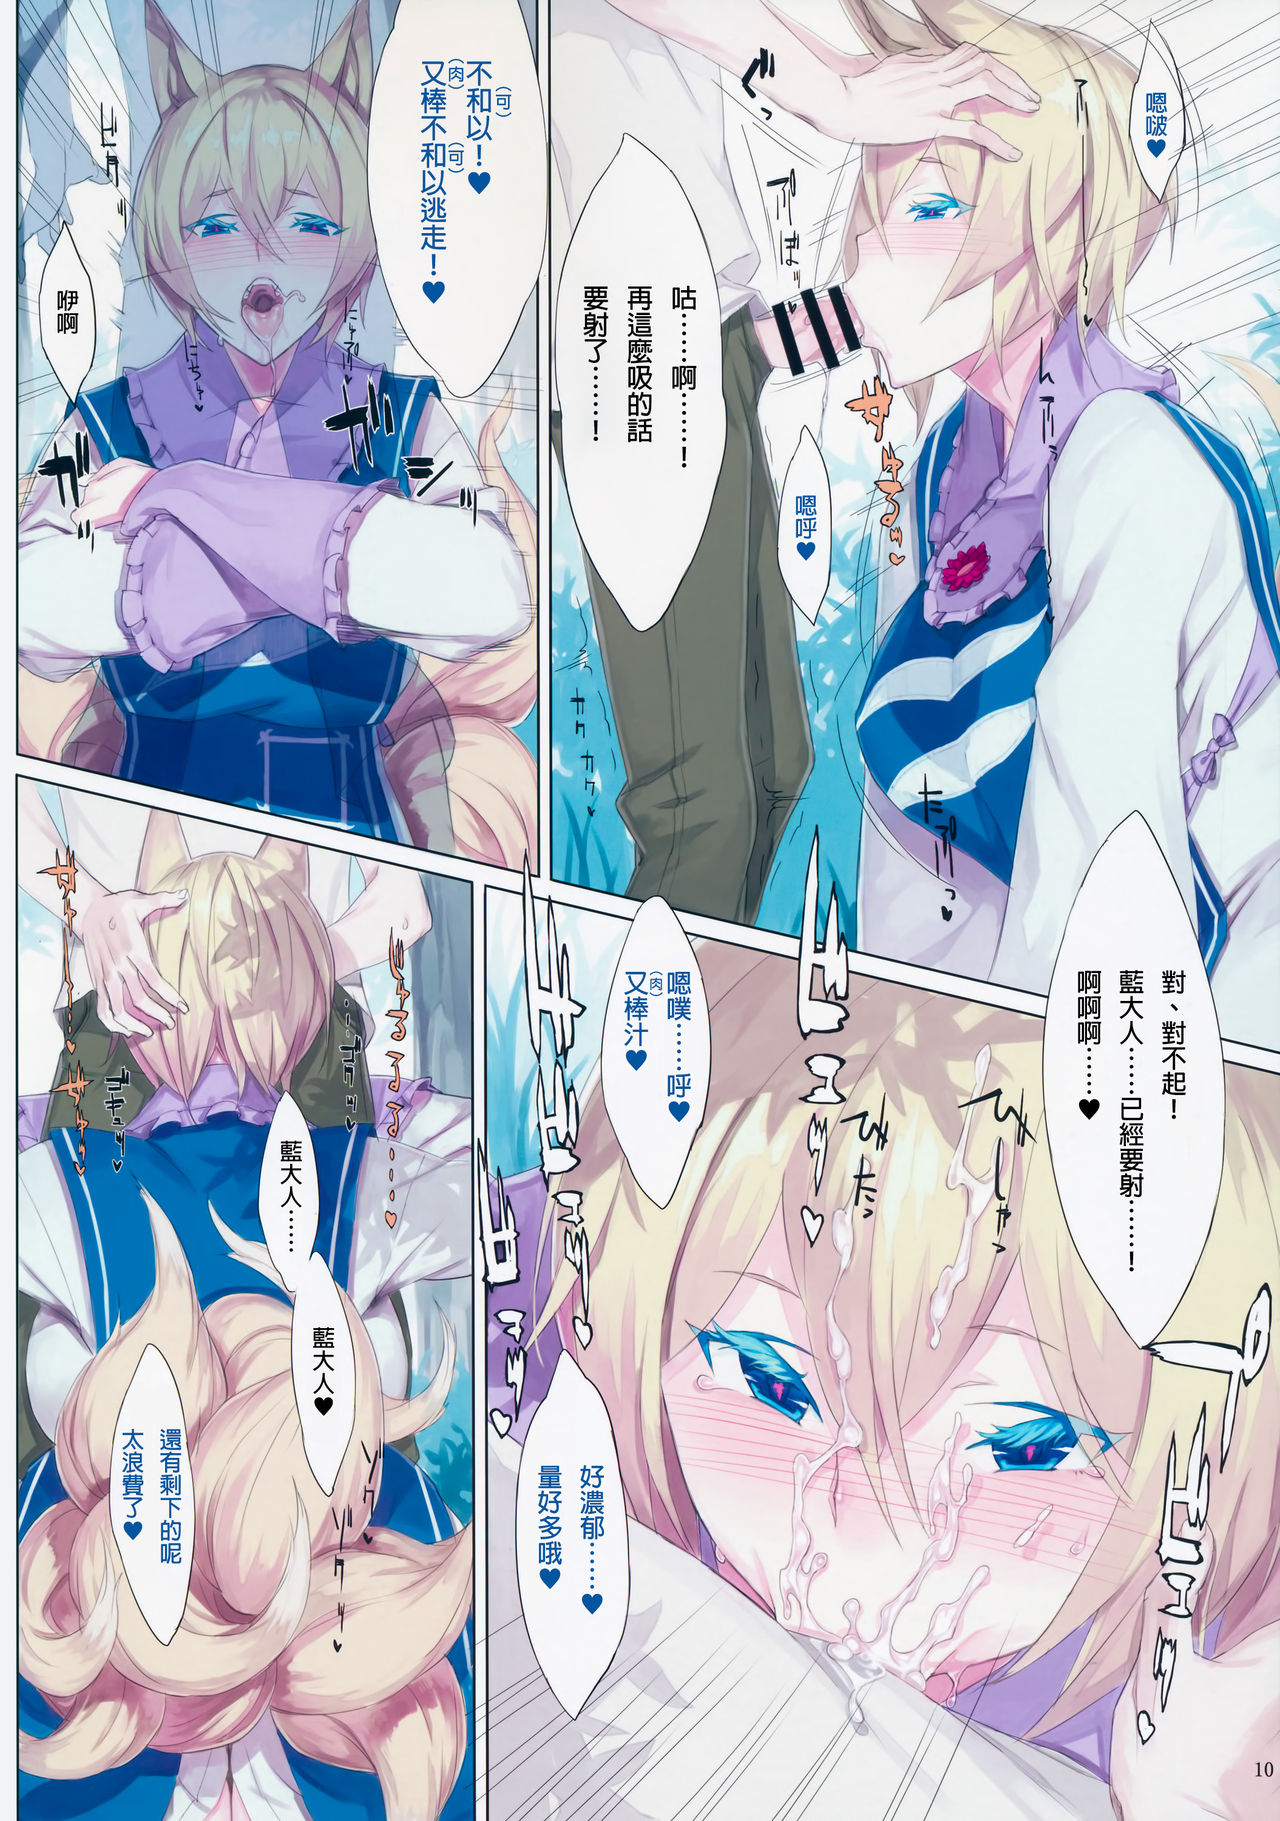 (Reitaisai 11) [Fakepucco (Usui)] EL GENSOW tercero (Touhou Project) [Chinese] [臭鼬娘漢化組] page 10 full